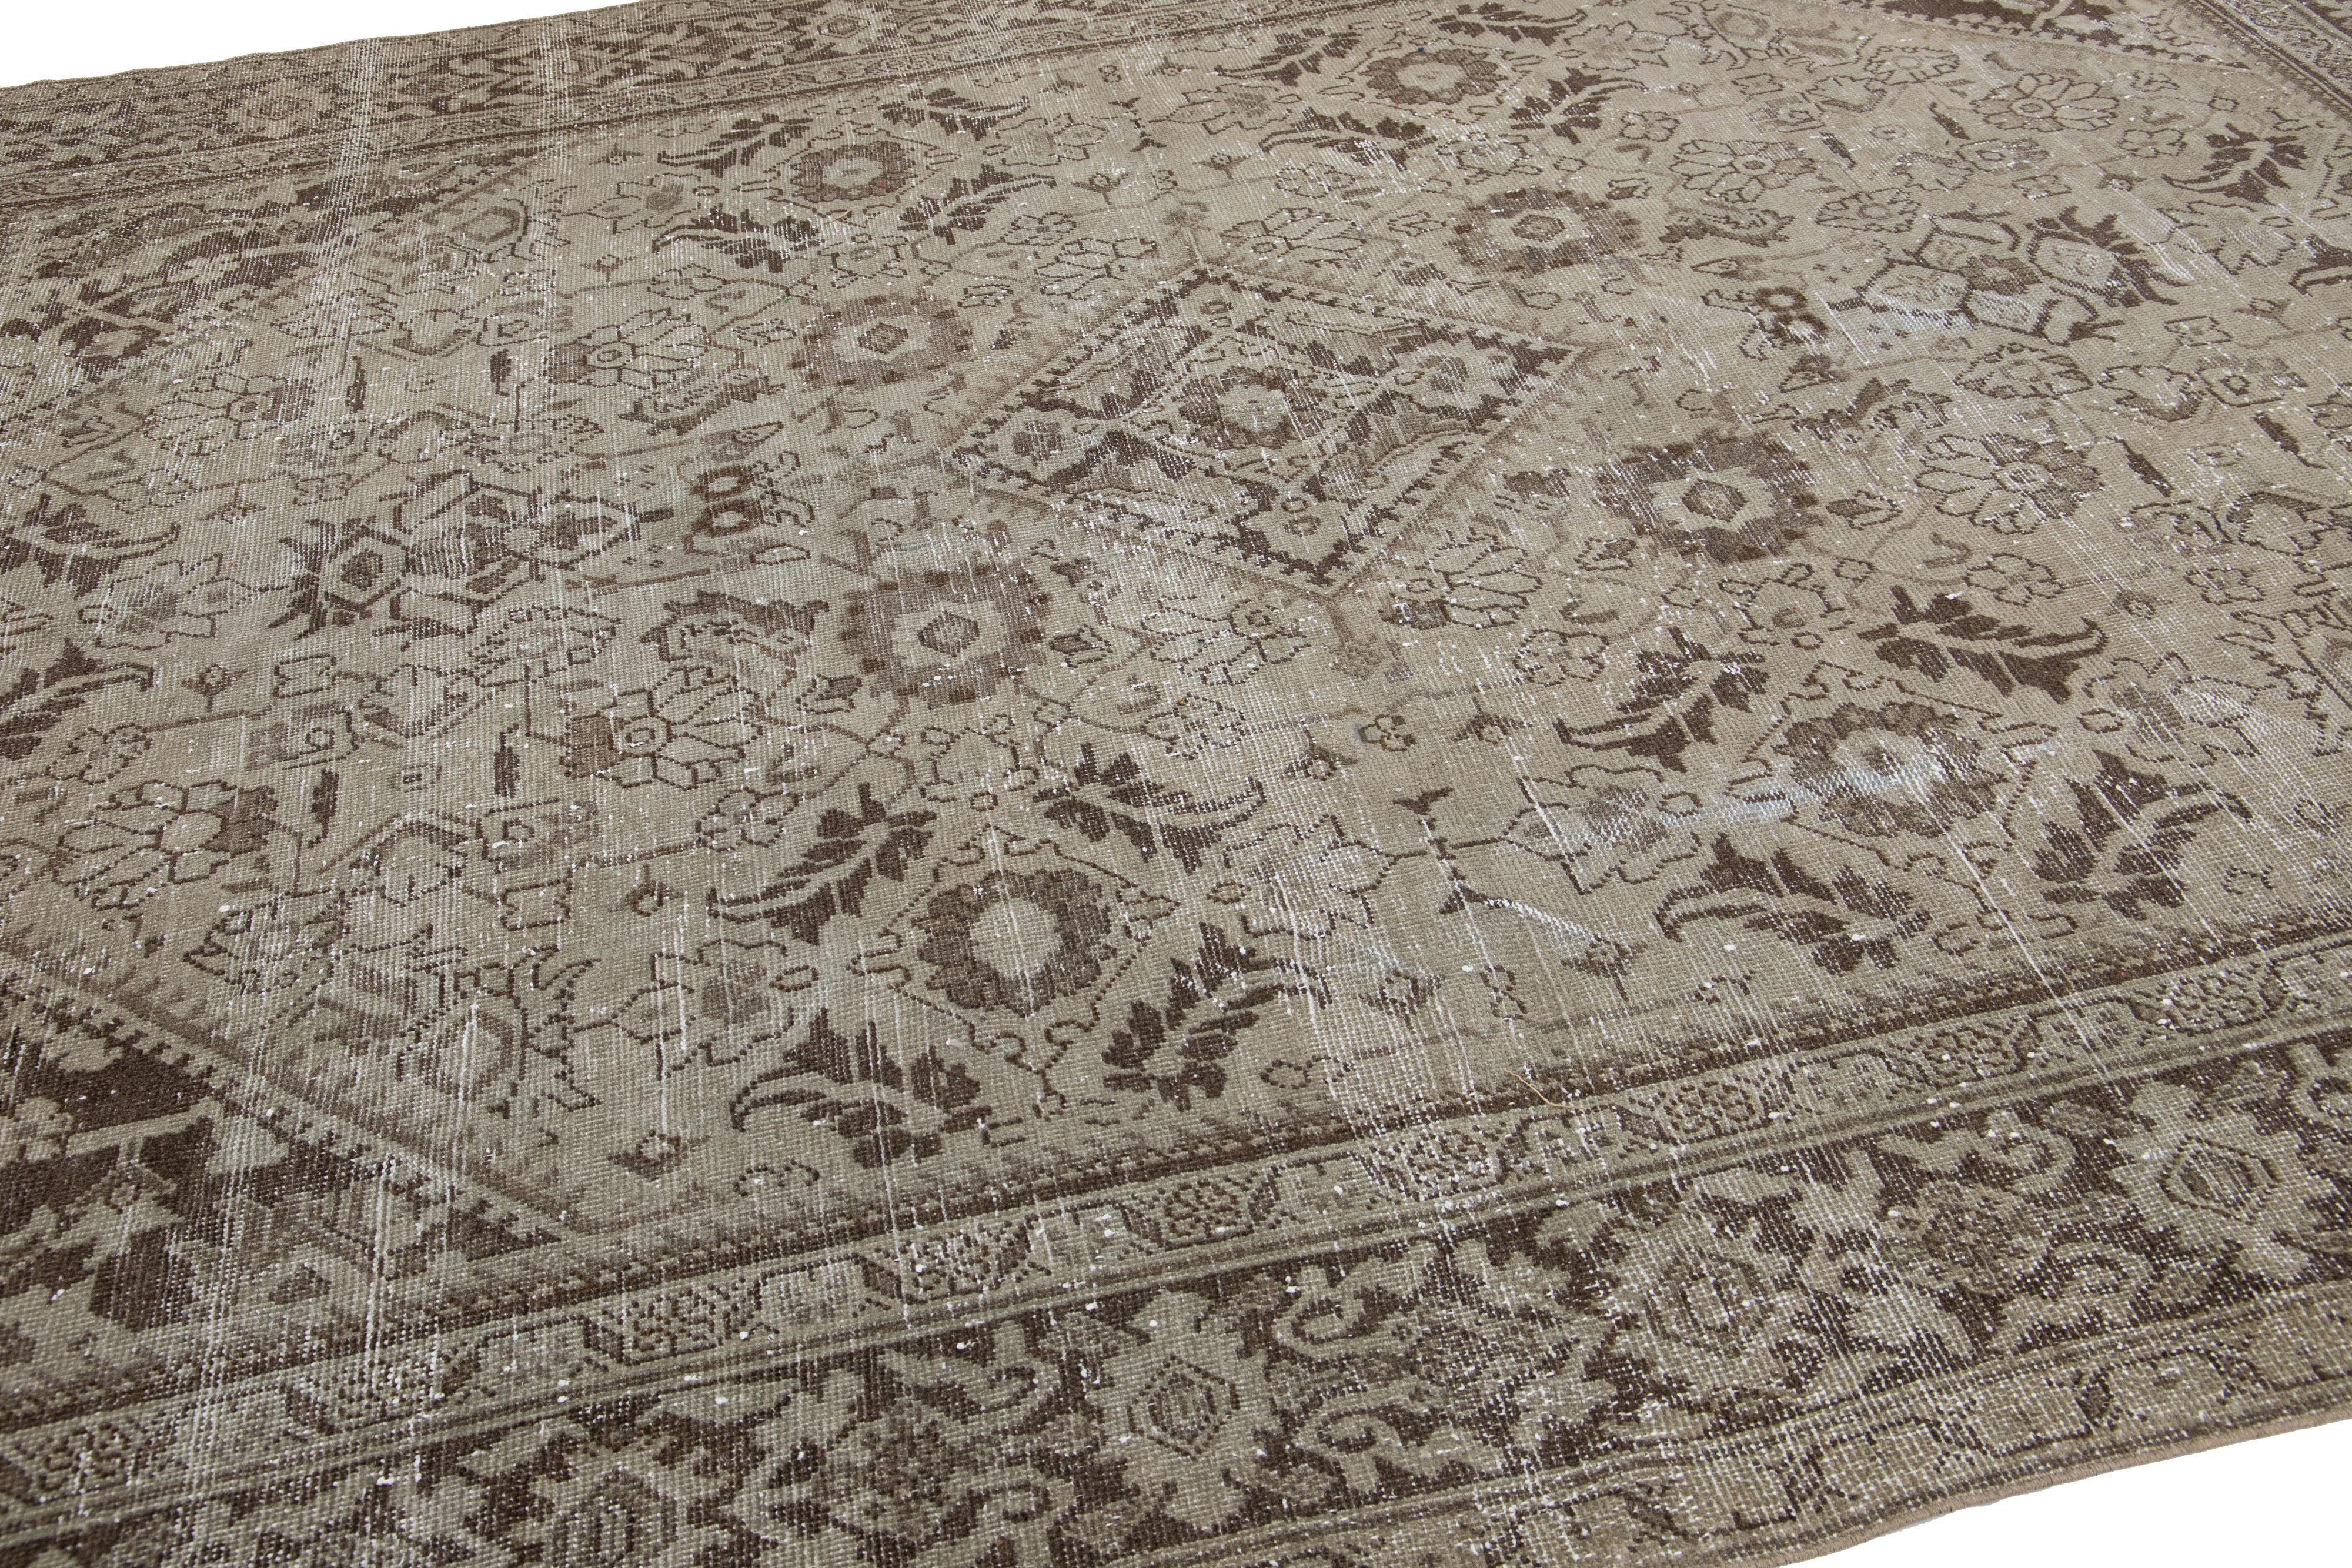 Antique Persian Mahal Handmade Beige & Brown Wool Rug with Allover Design In Good Condition For Sale In Norwalk, CT